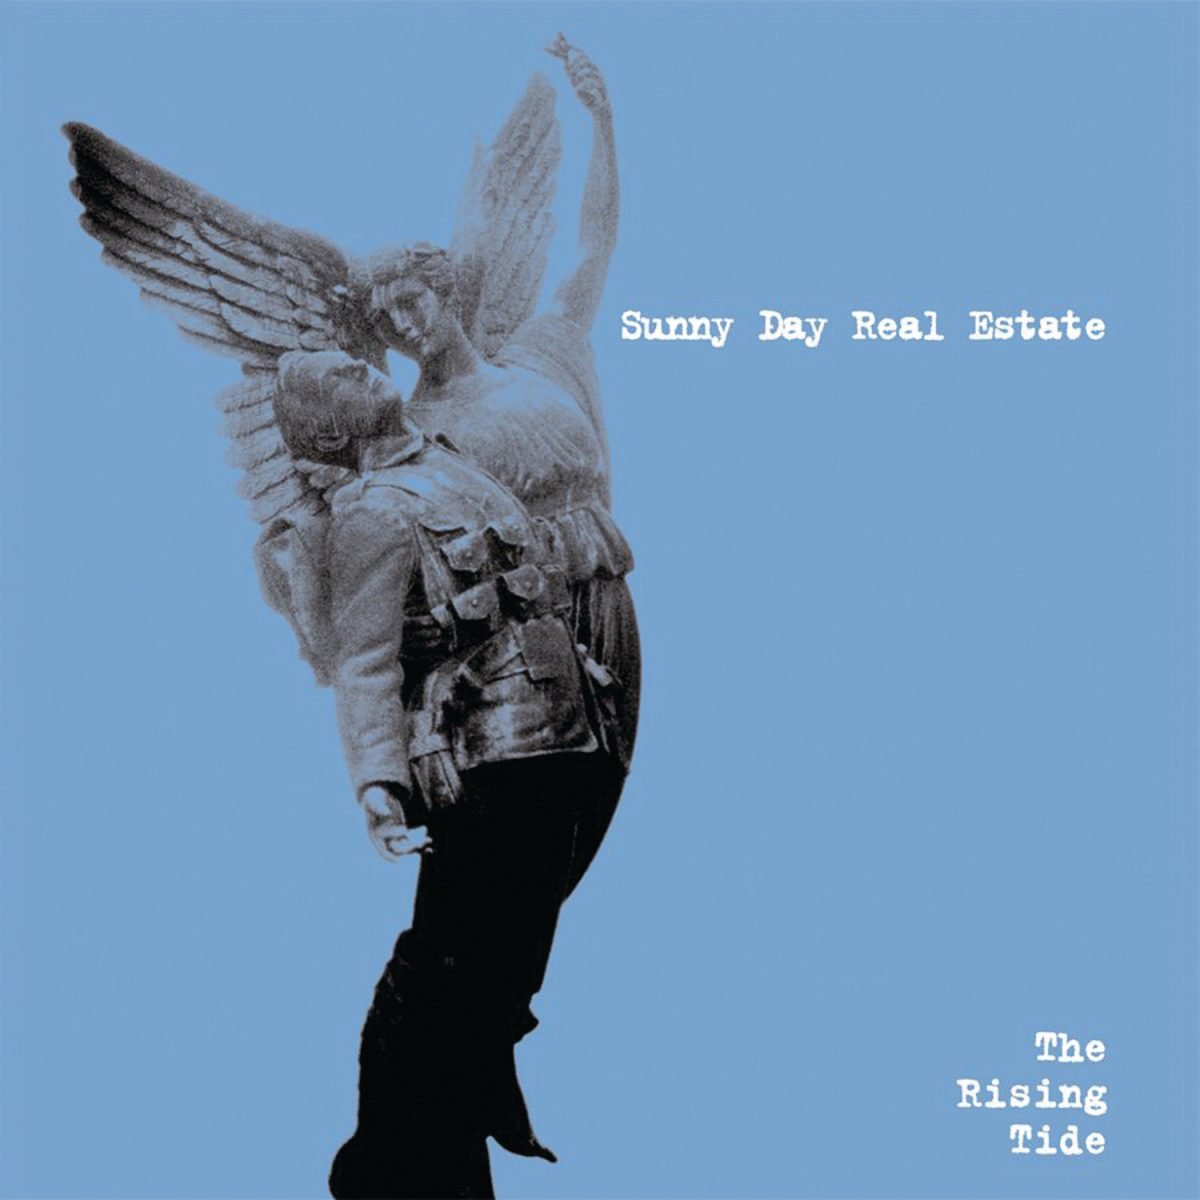 Sunny Day Real Estate: The Rising Tide Vinyl 2LP - Steadfast Records